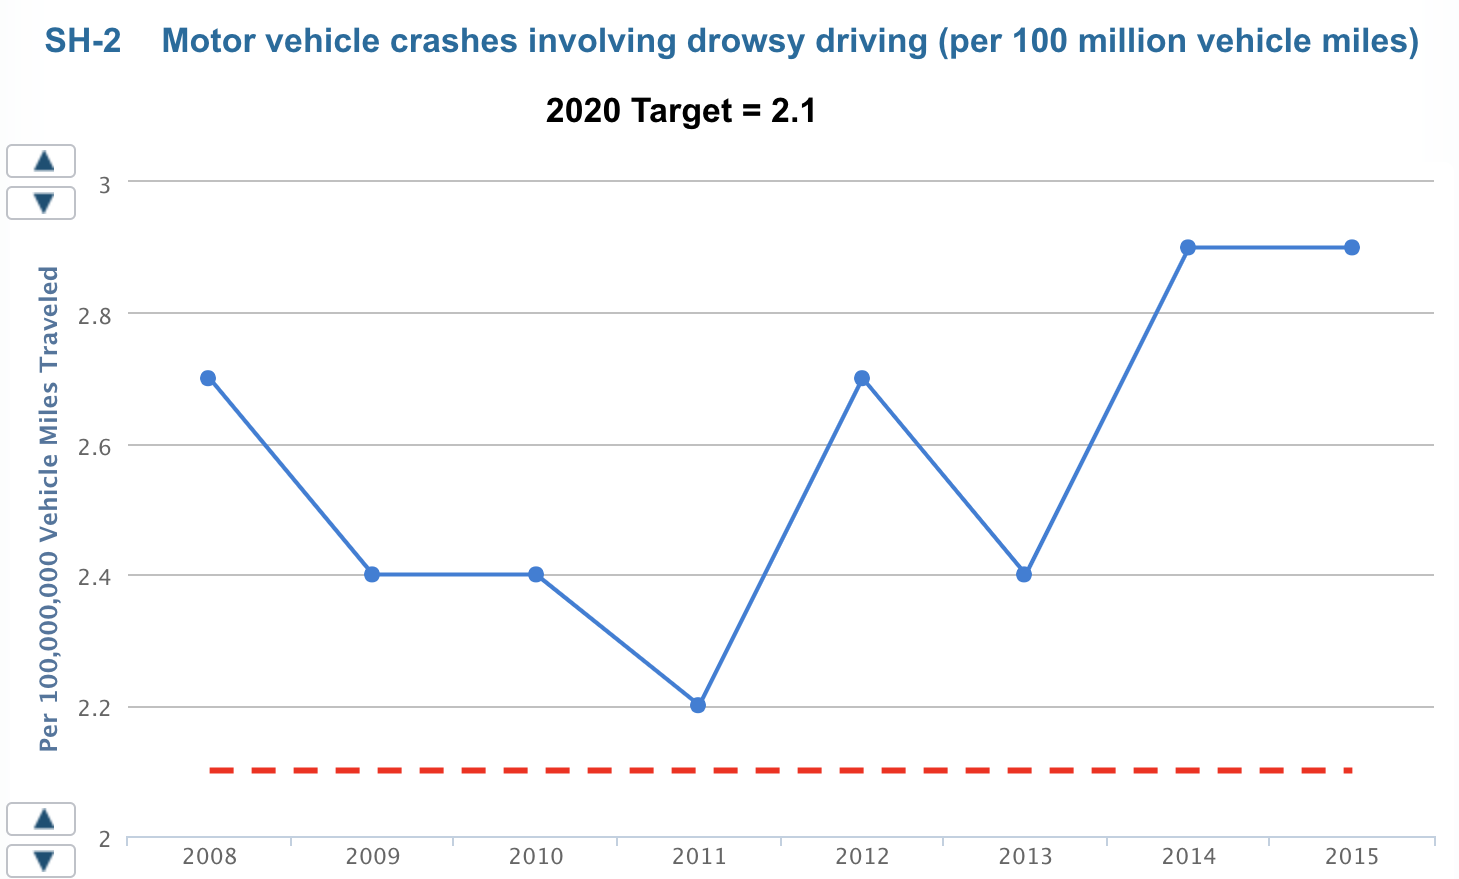 Motor vehicle crashes are linked to drowsy driving